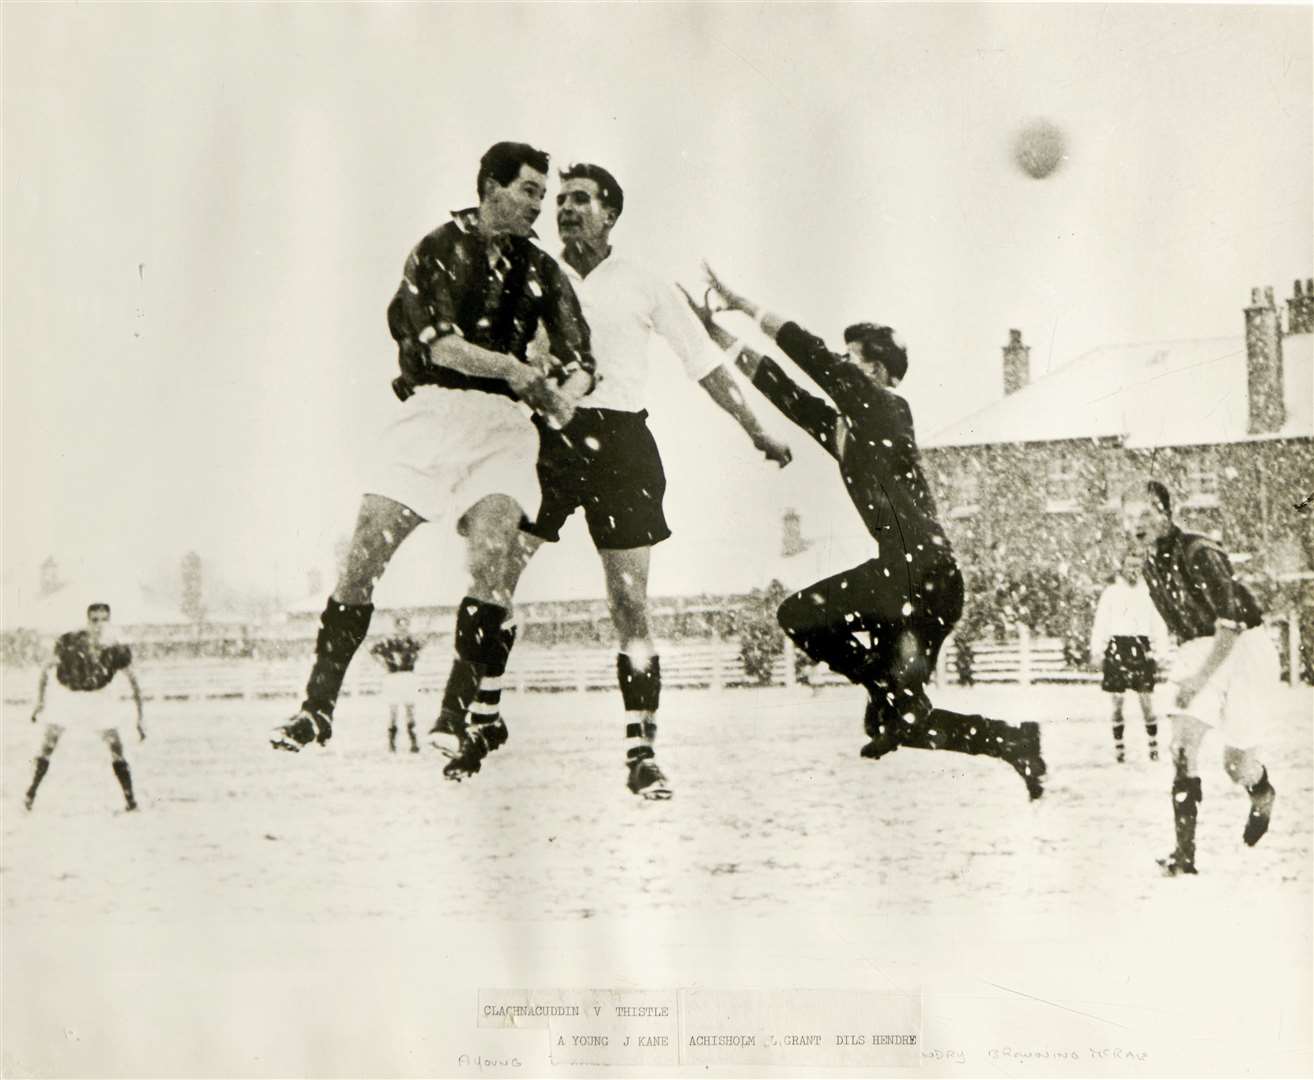 An aerial dual in a Thistle versus Clach game at Kingsmills in the 60s.